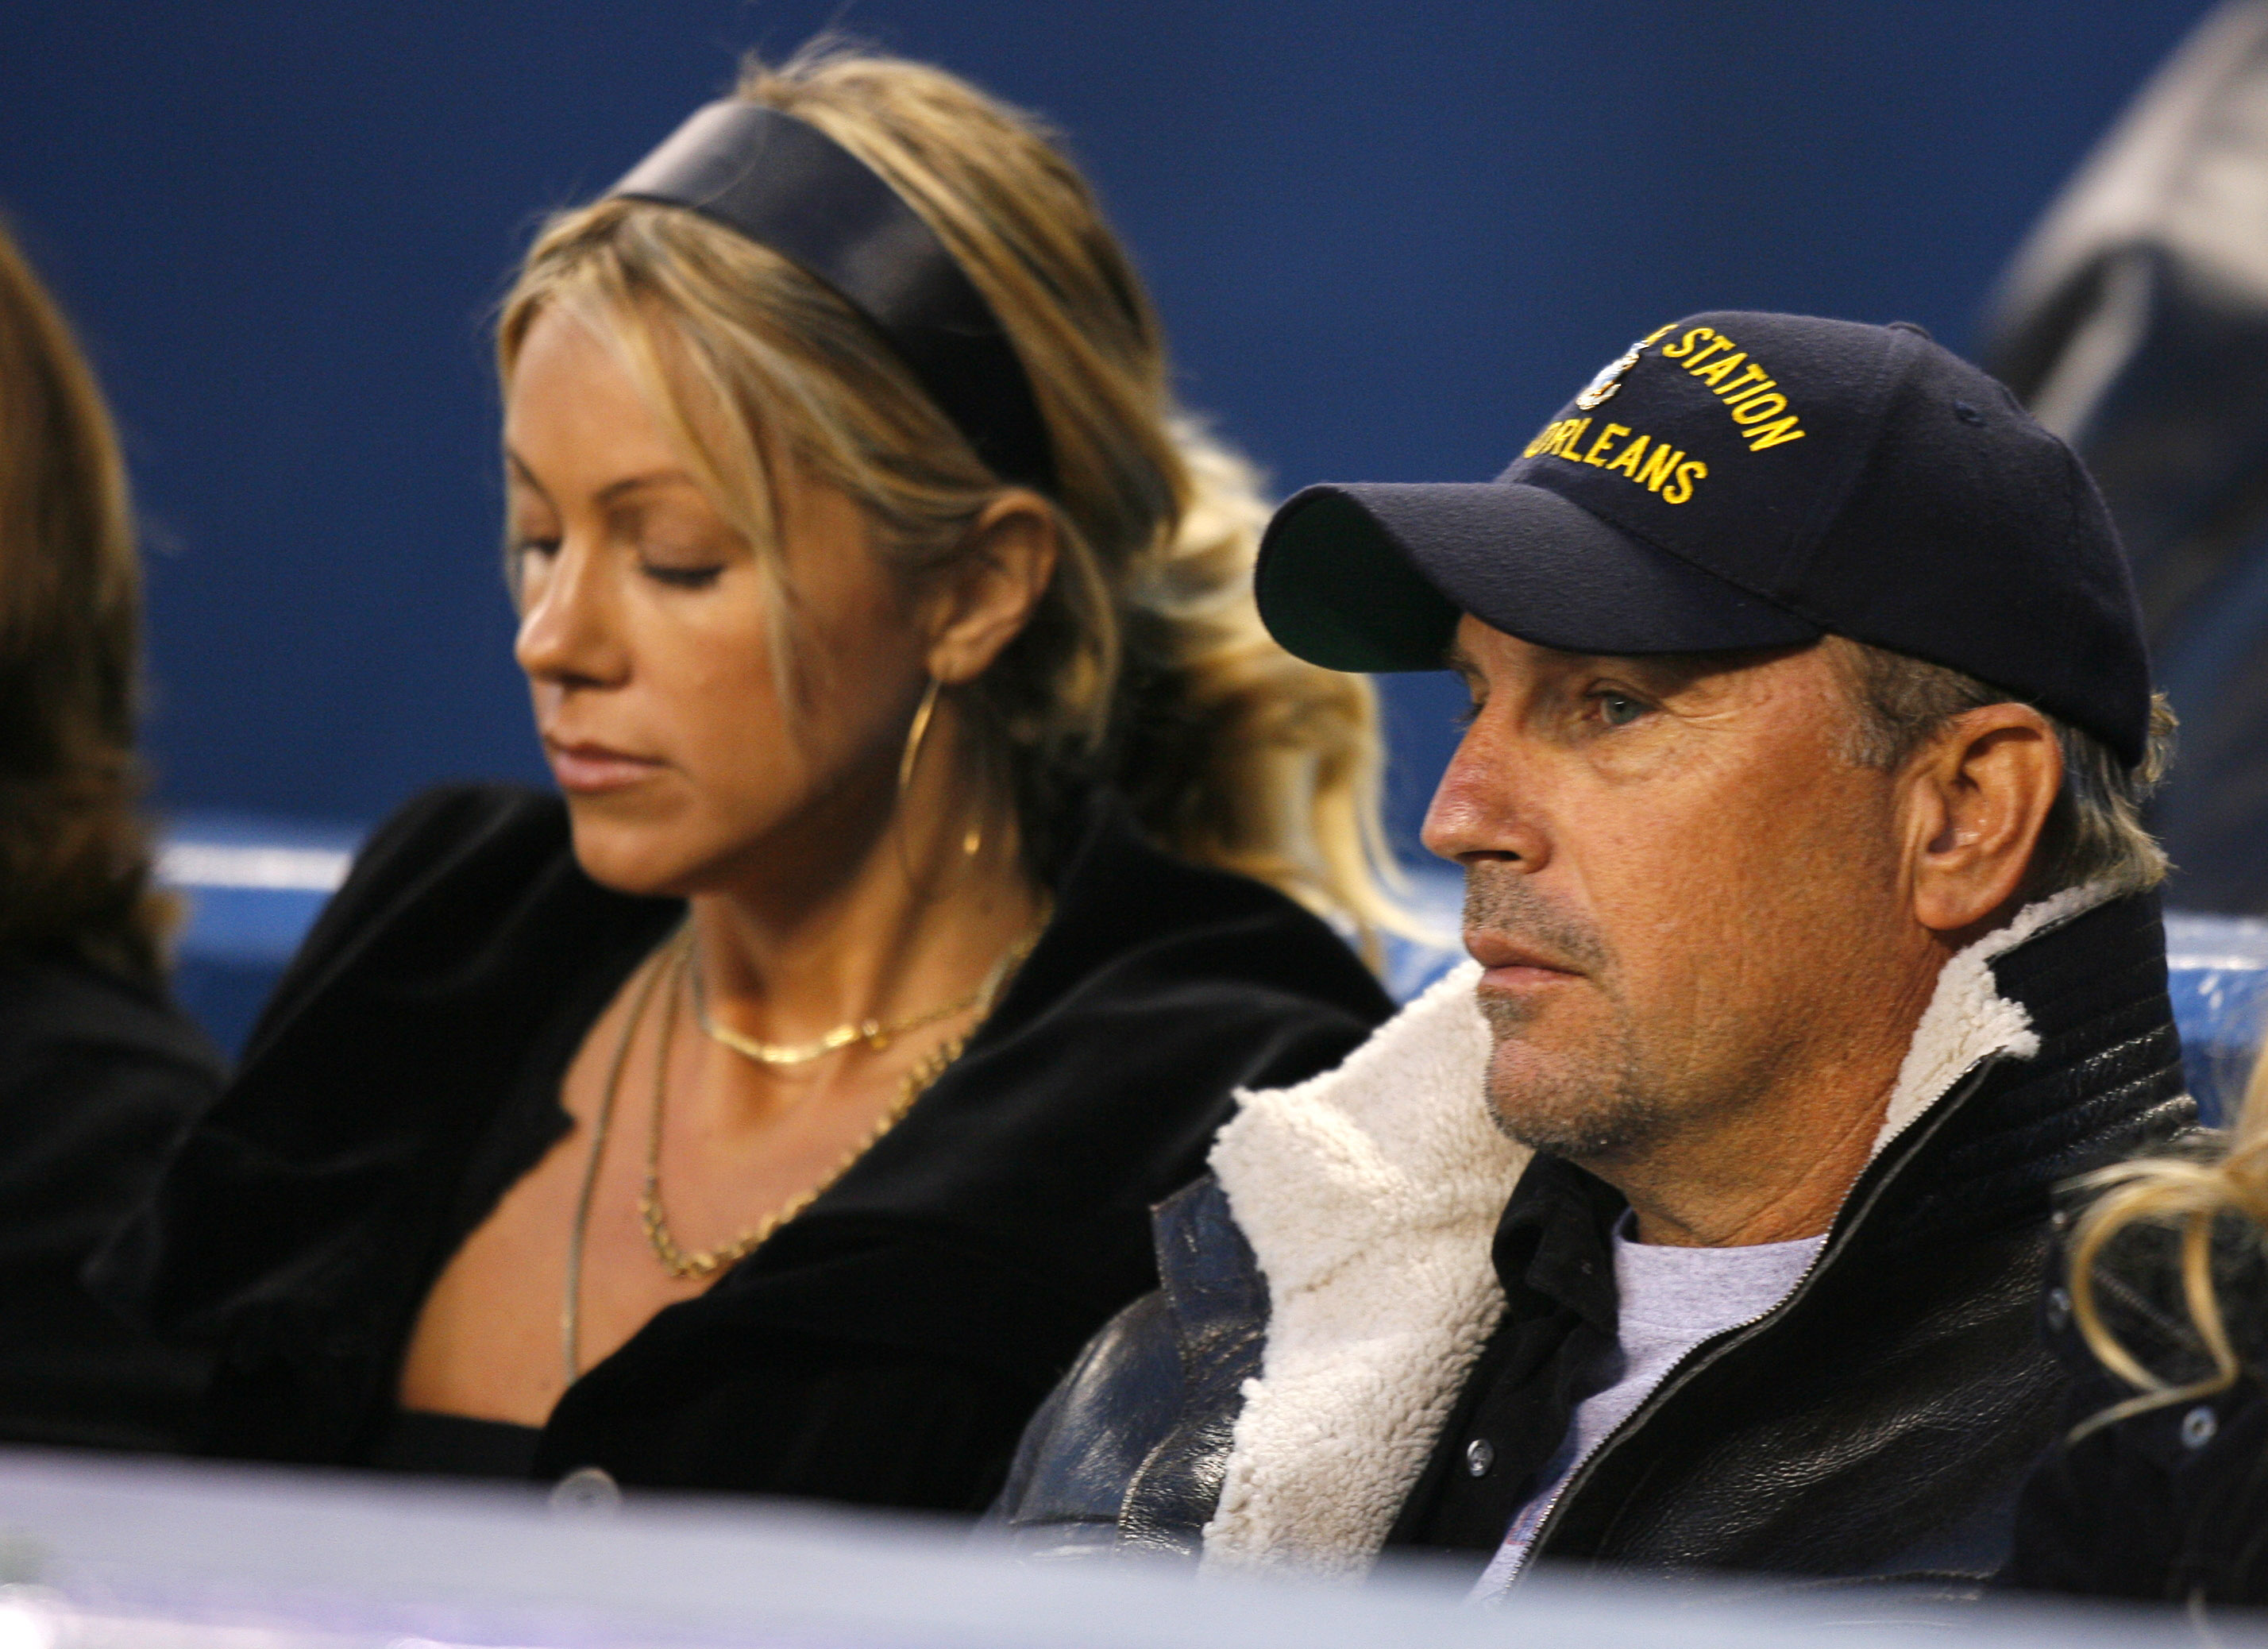 Christine Baumgartner and Kevin Costner watch a game at Yankee Stadium in the Bronx, New York, on September 12, 2006 | Source: Getty Images